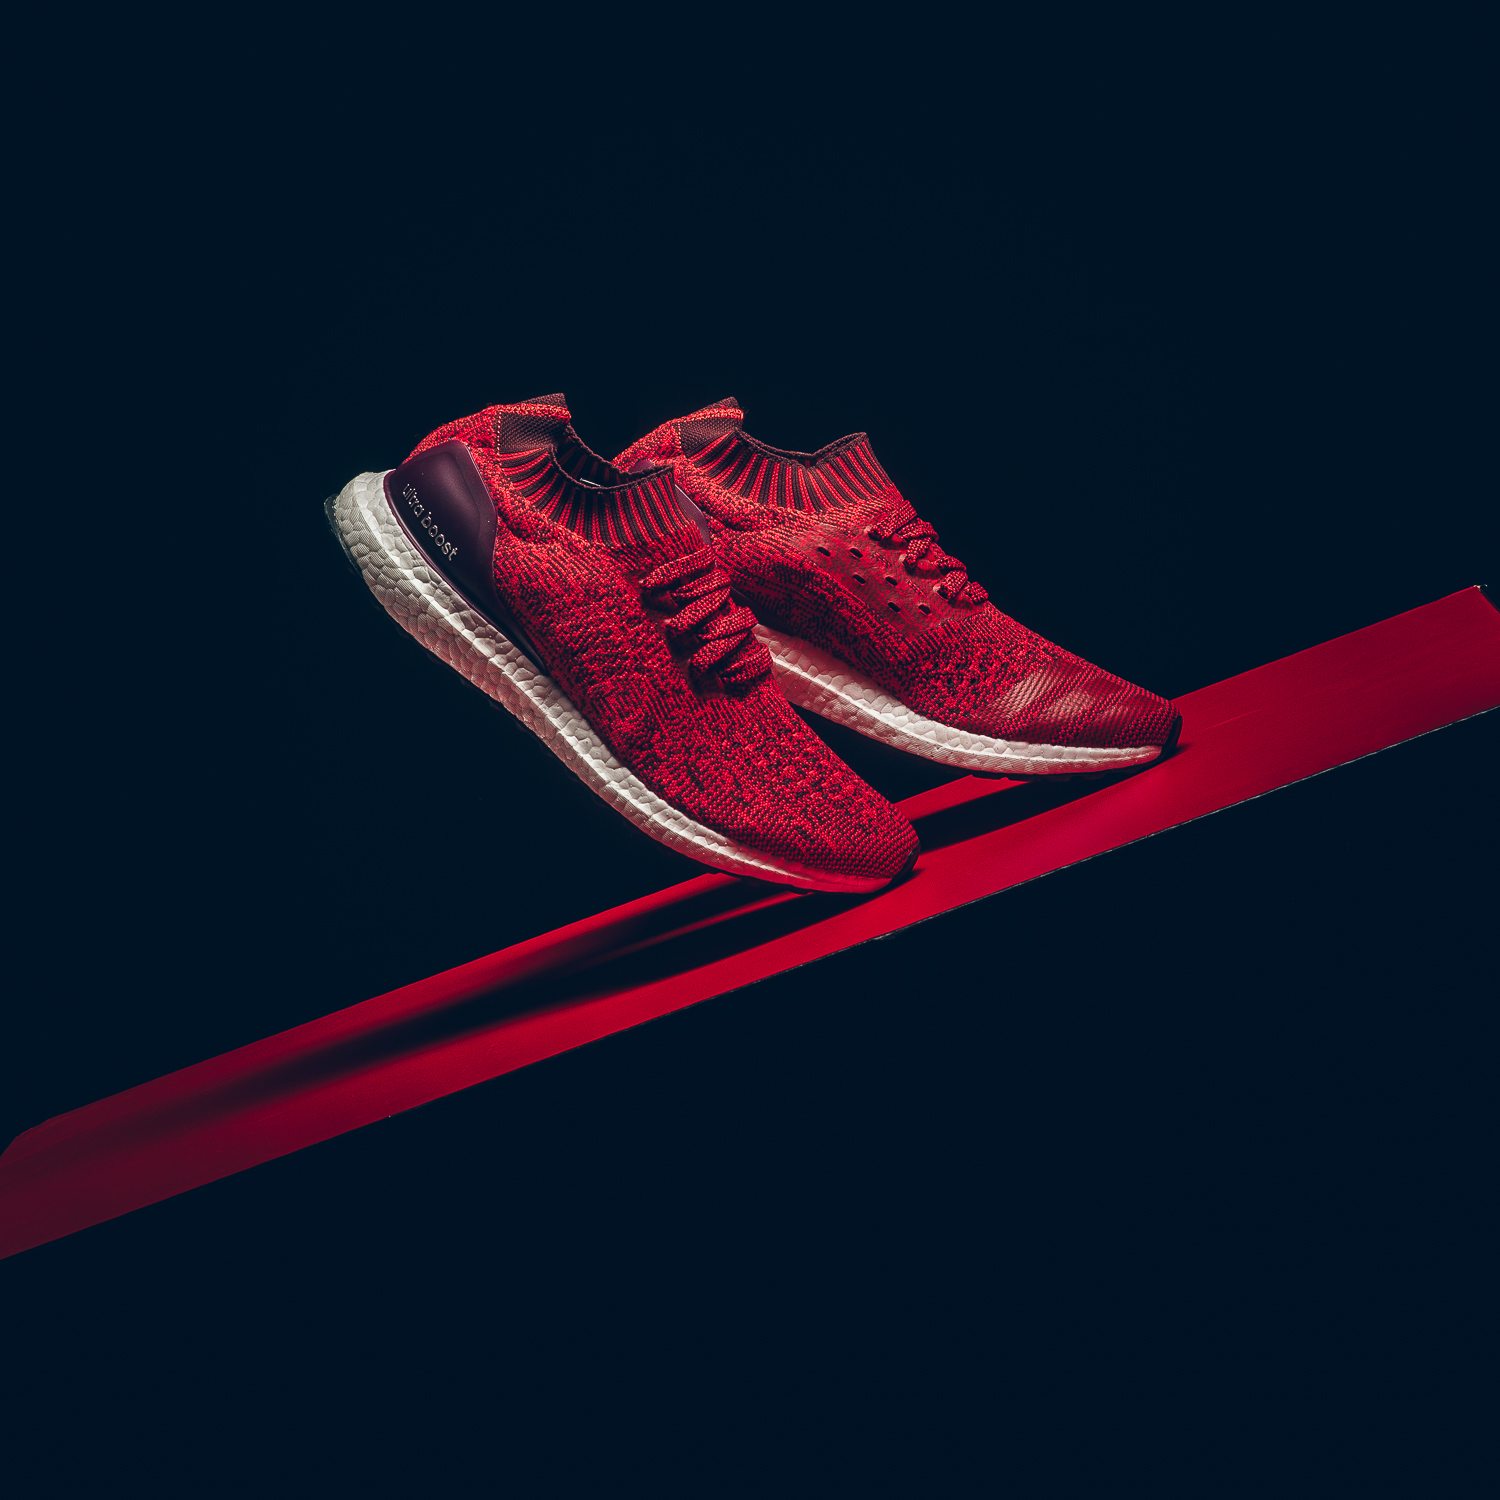 adidas pure boost tactile red